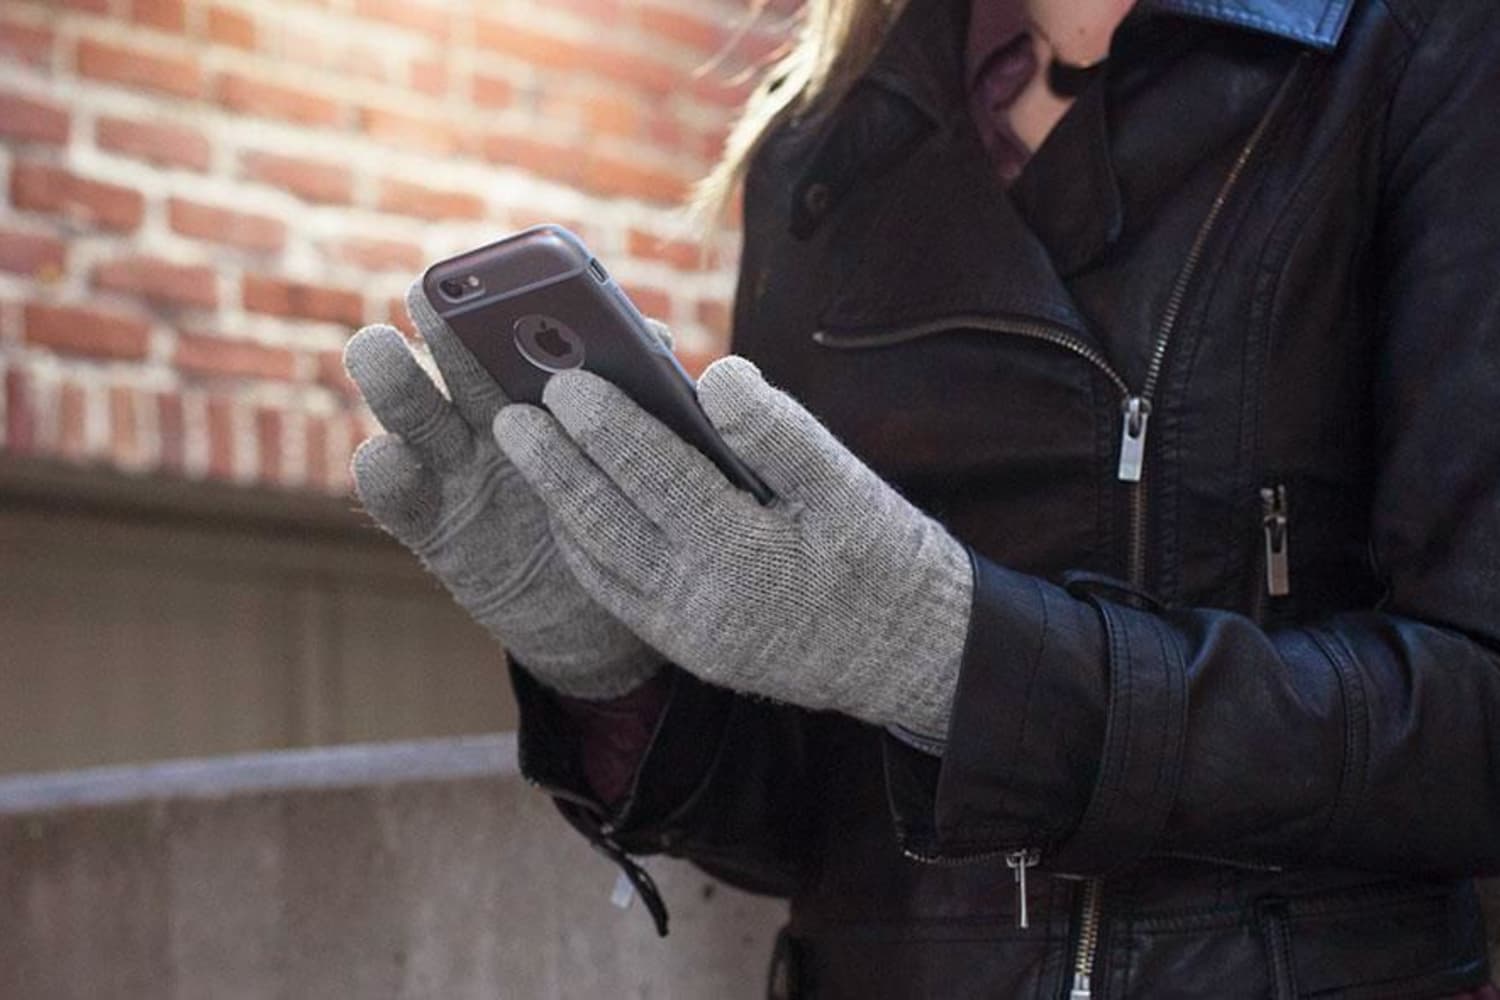 The Best Touchscreen-Compatible Gloves